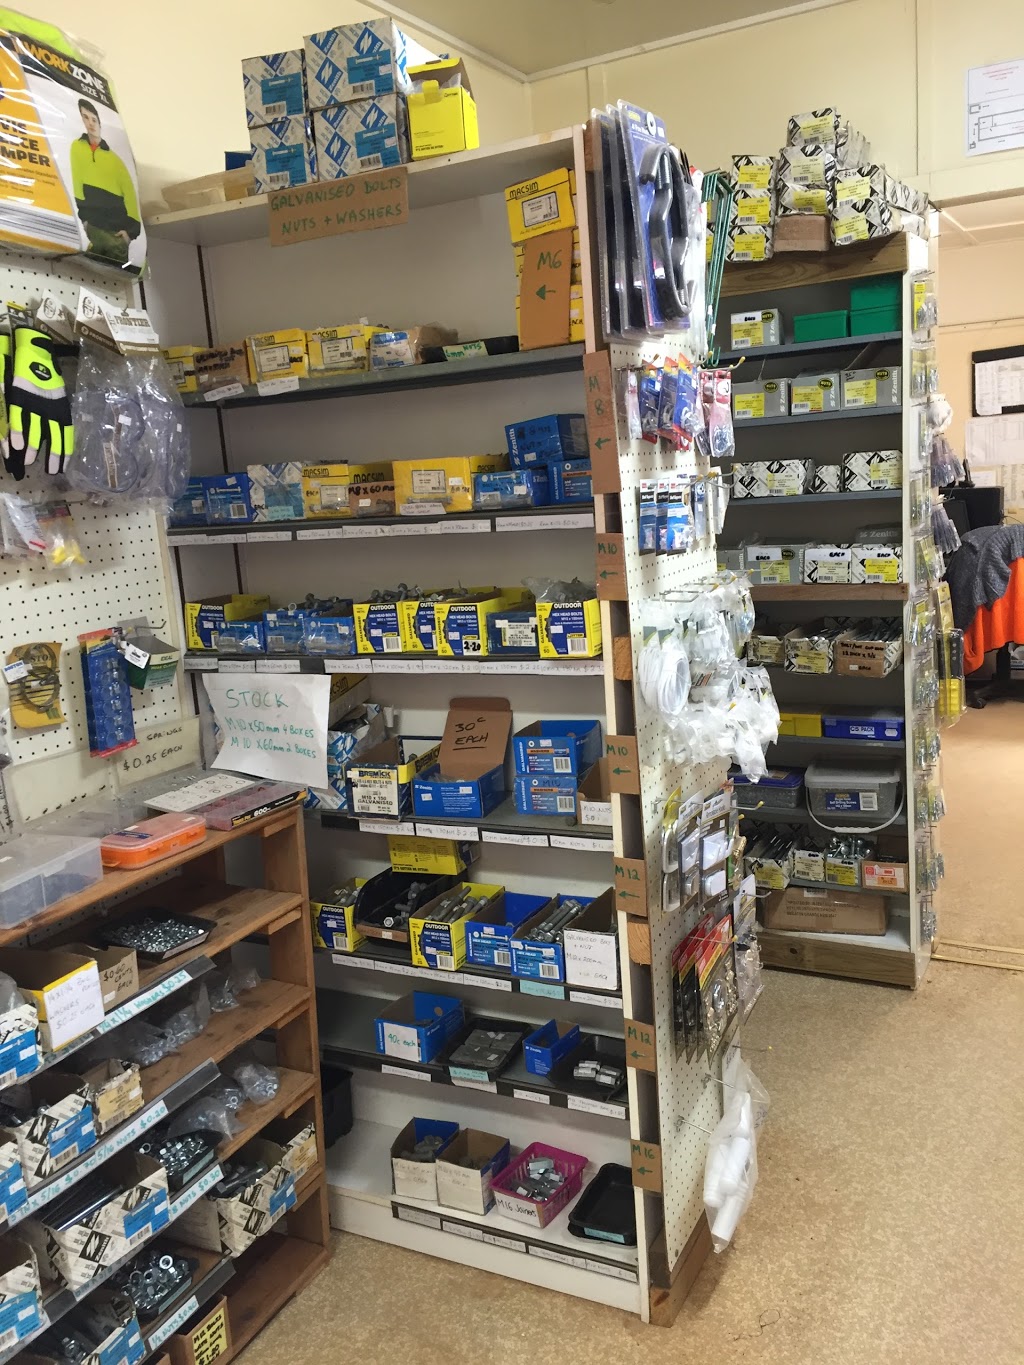 Andy Hire | hardware store | 81/83 High St, Russell Island QLD 4184, Australia | 0734091996 OR +61 7 3409 1996